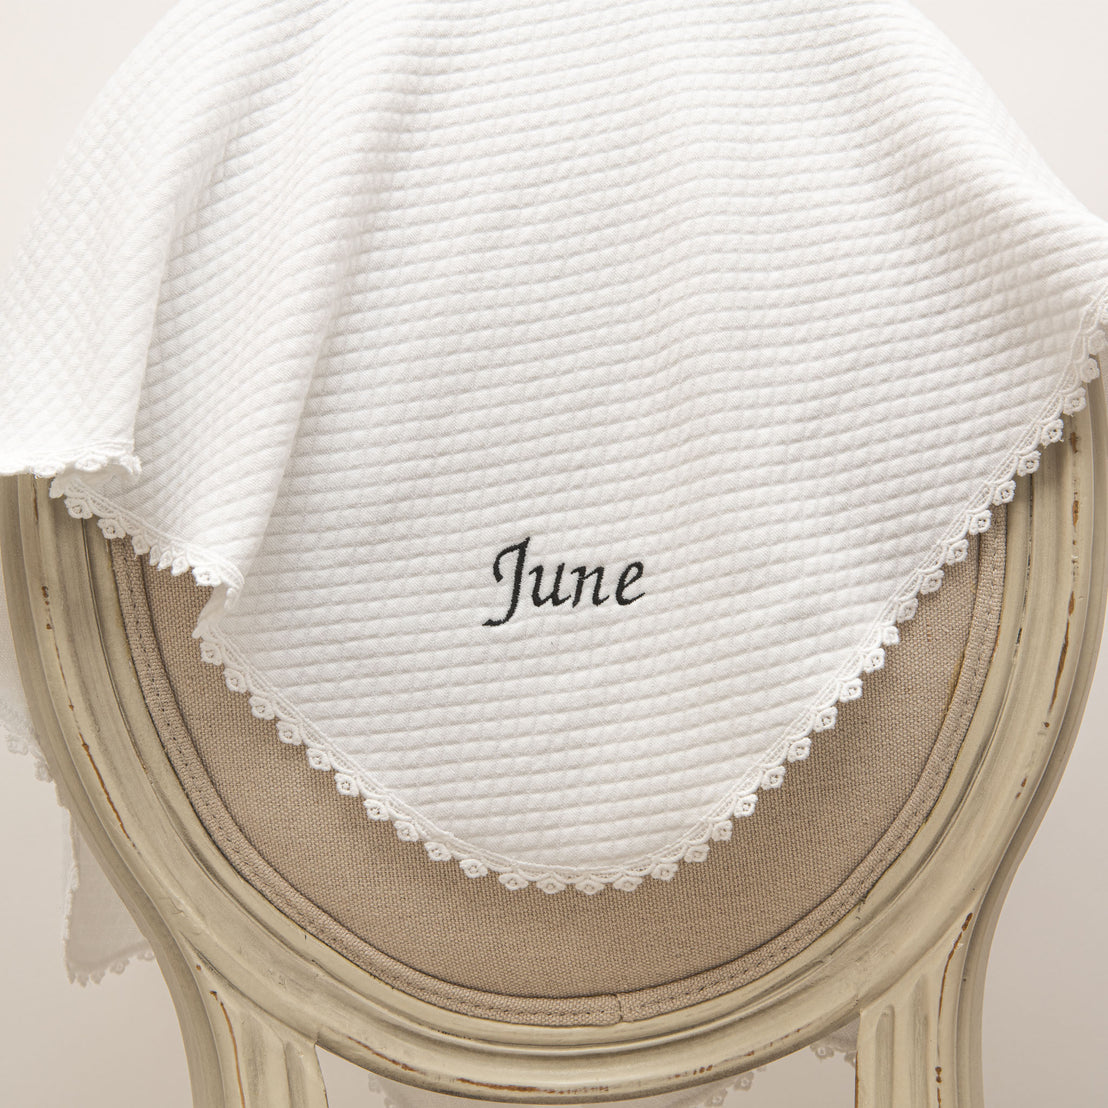 A white textured June Personalized Blanket with the name "June" embroidered in black, draped over an elegant vintage cream-colored chair with intricate details.